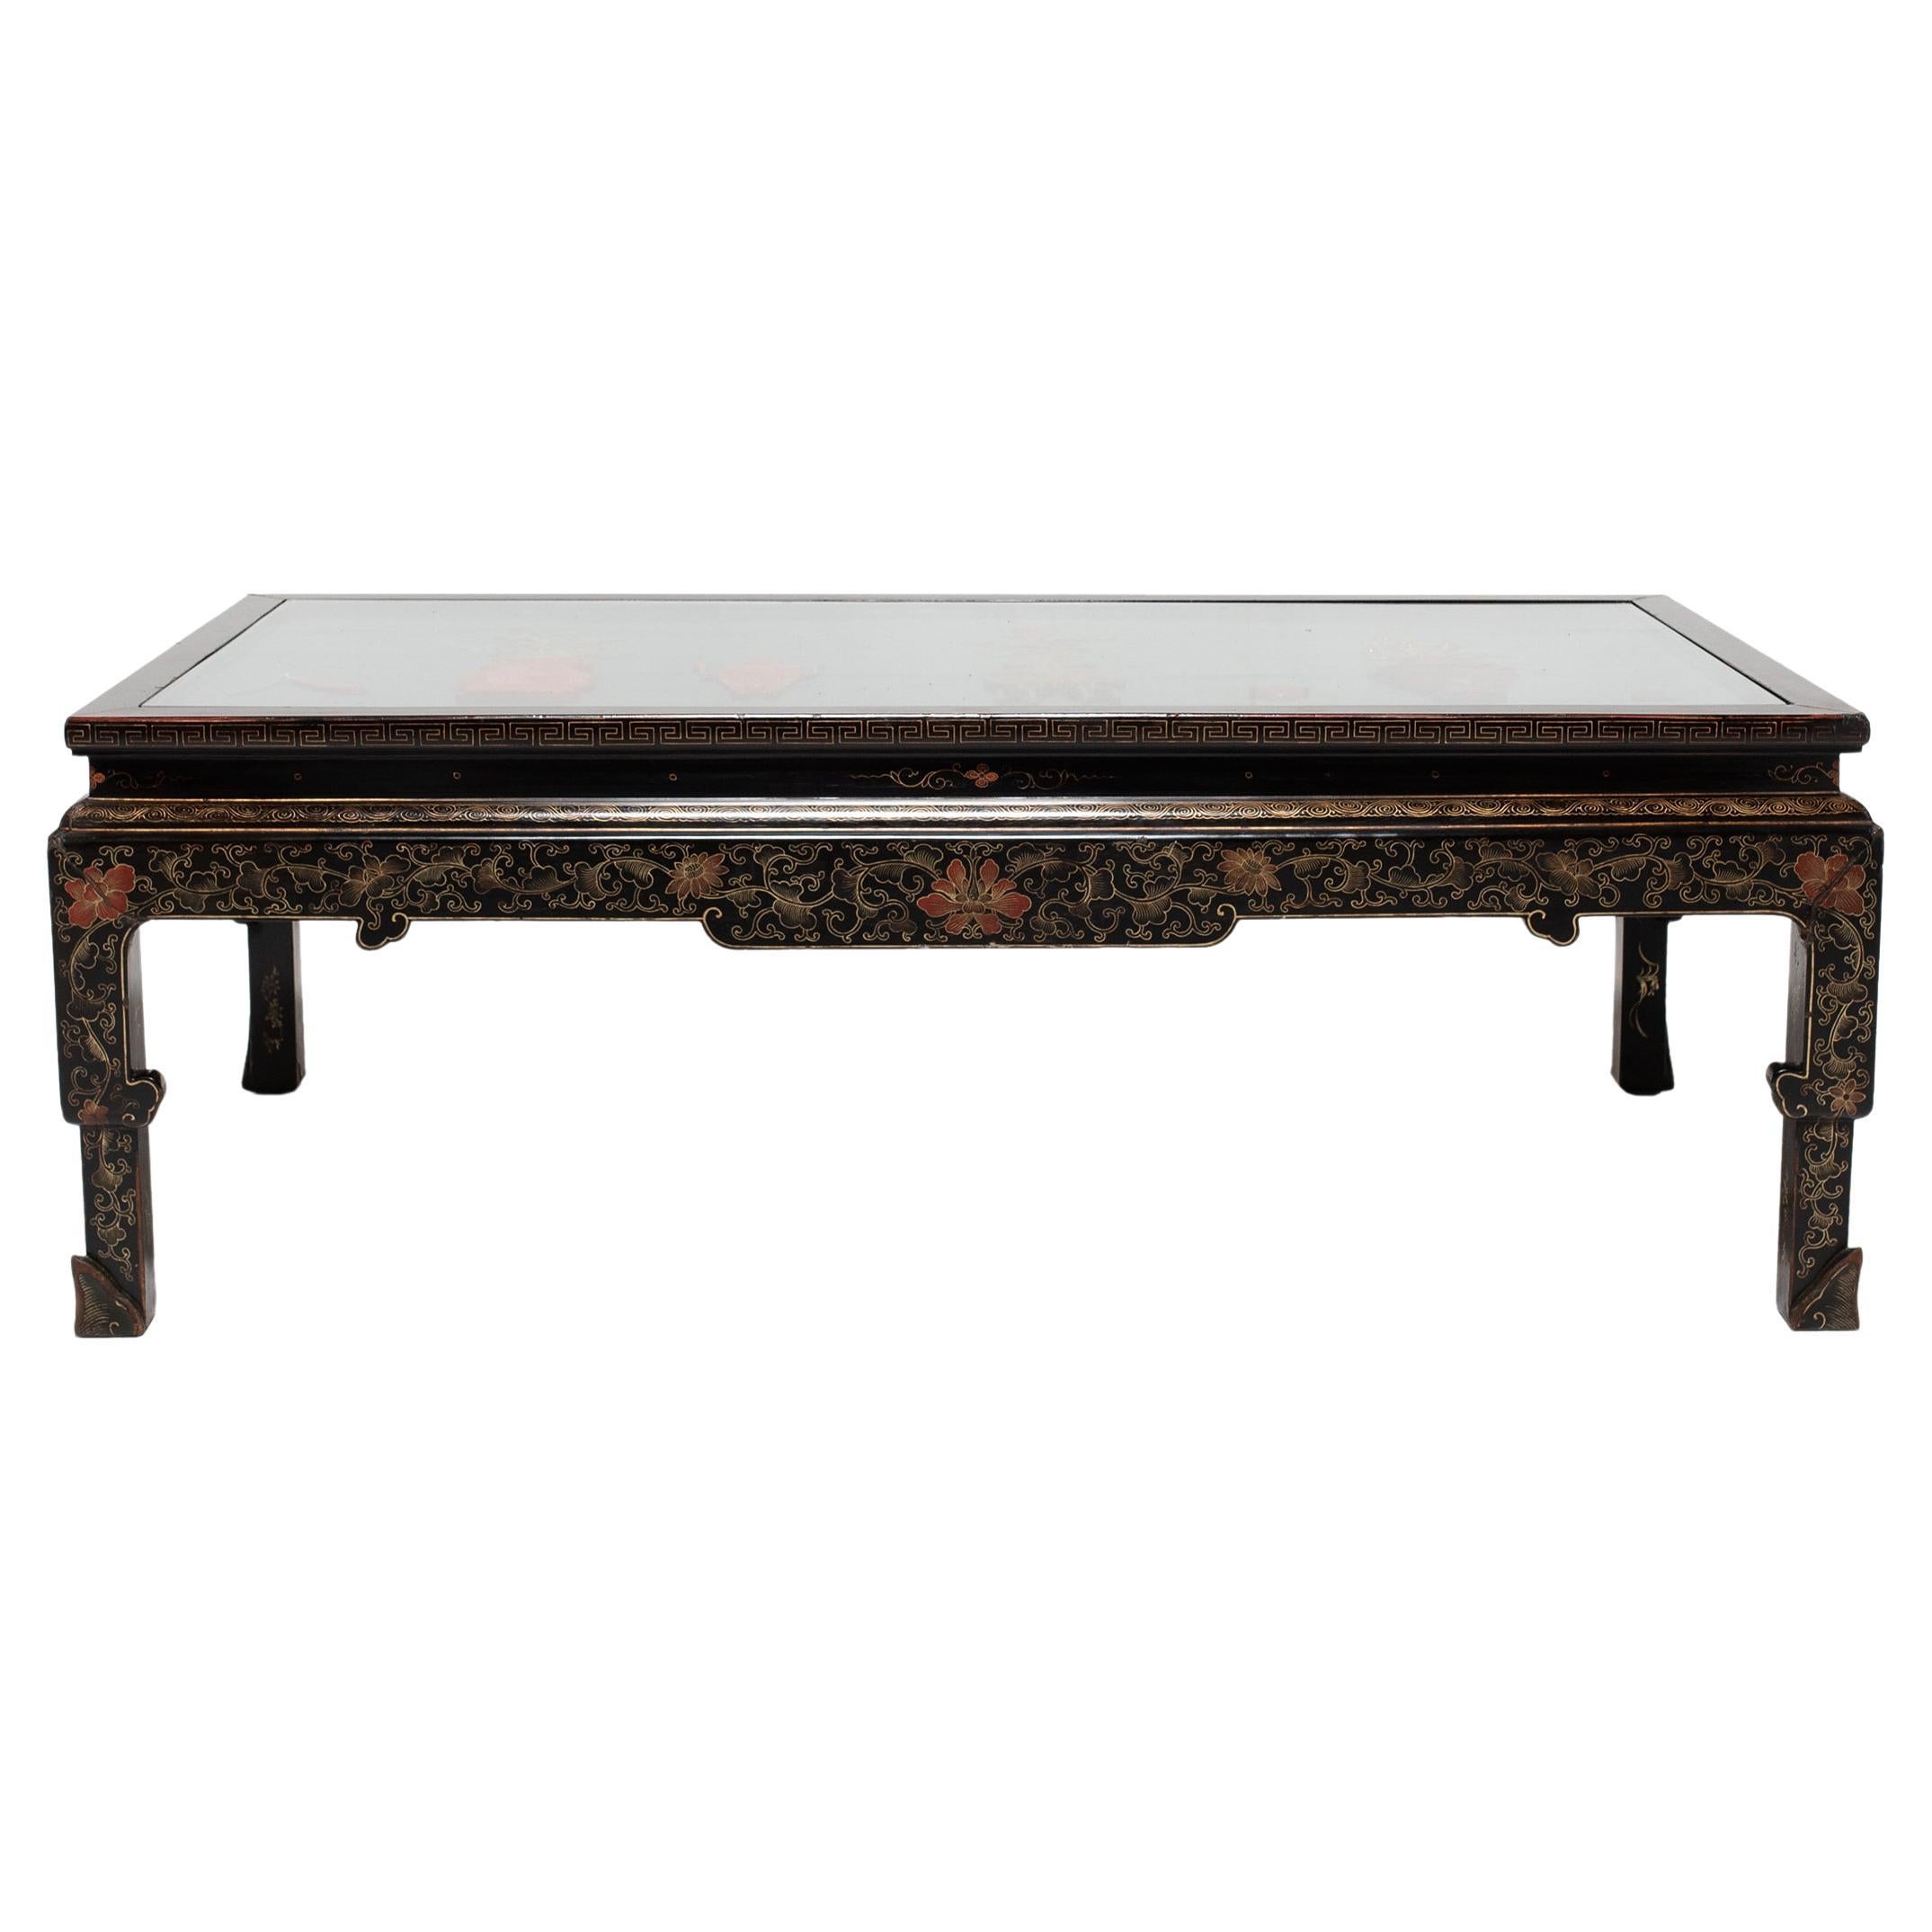 Painted Chinese Kang Table with Stone Inlay, c. 1900 For Sale